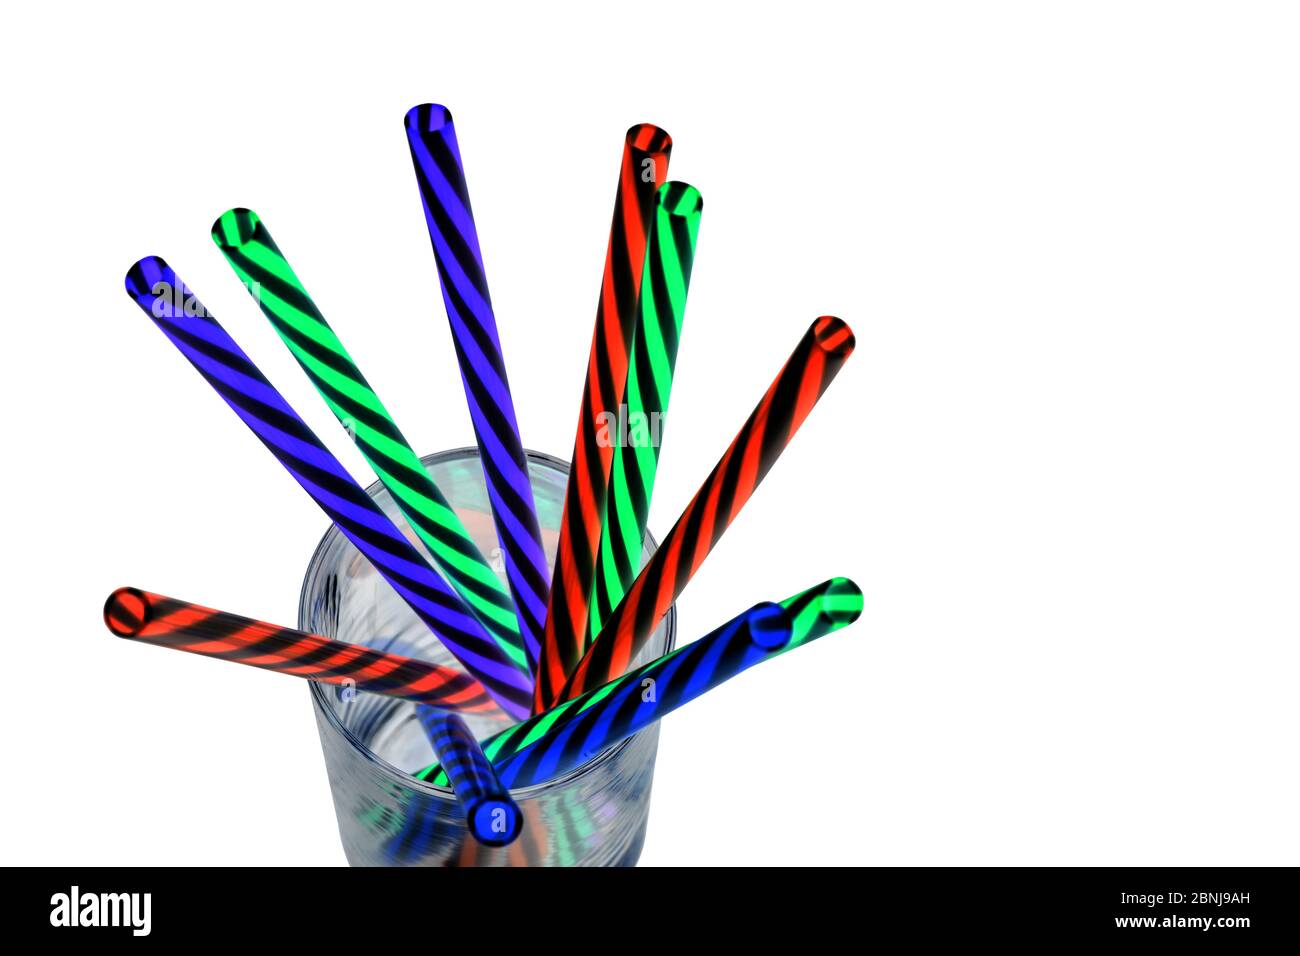 Neon colored plastic drinking straws placed in a glass.jpg Stock Photo